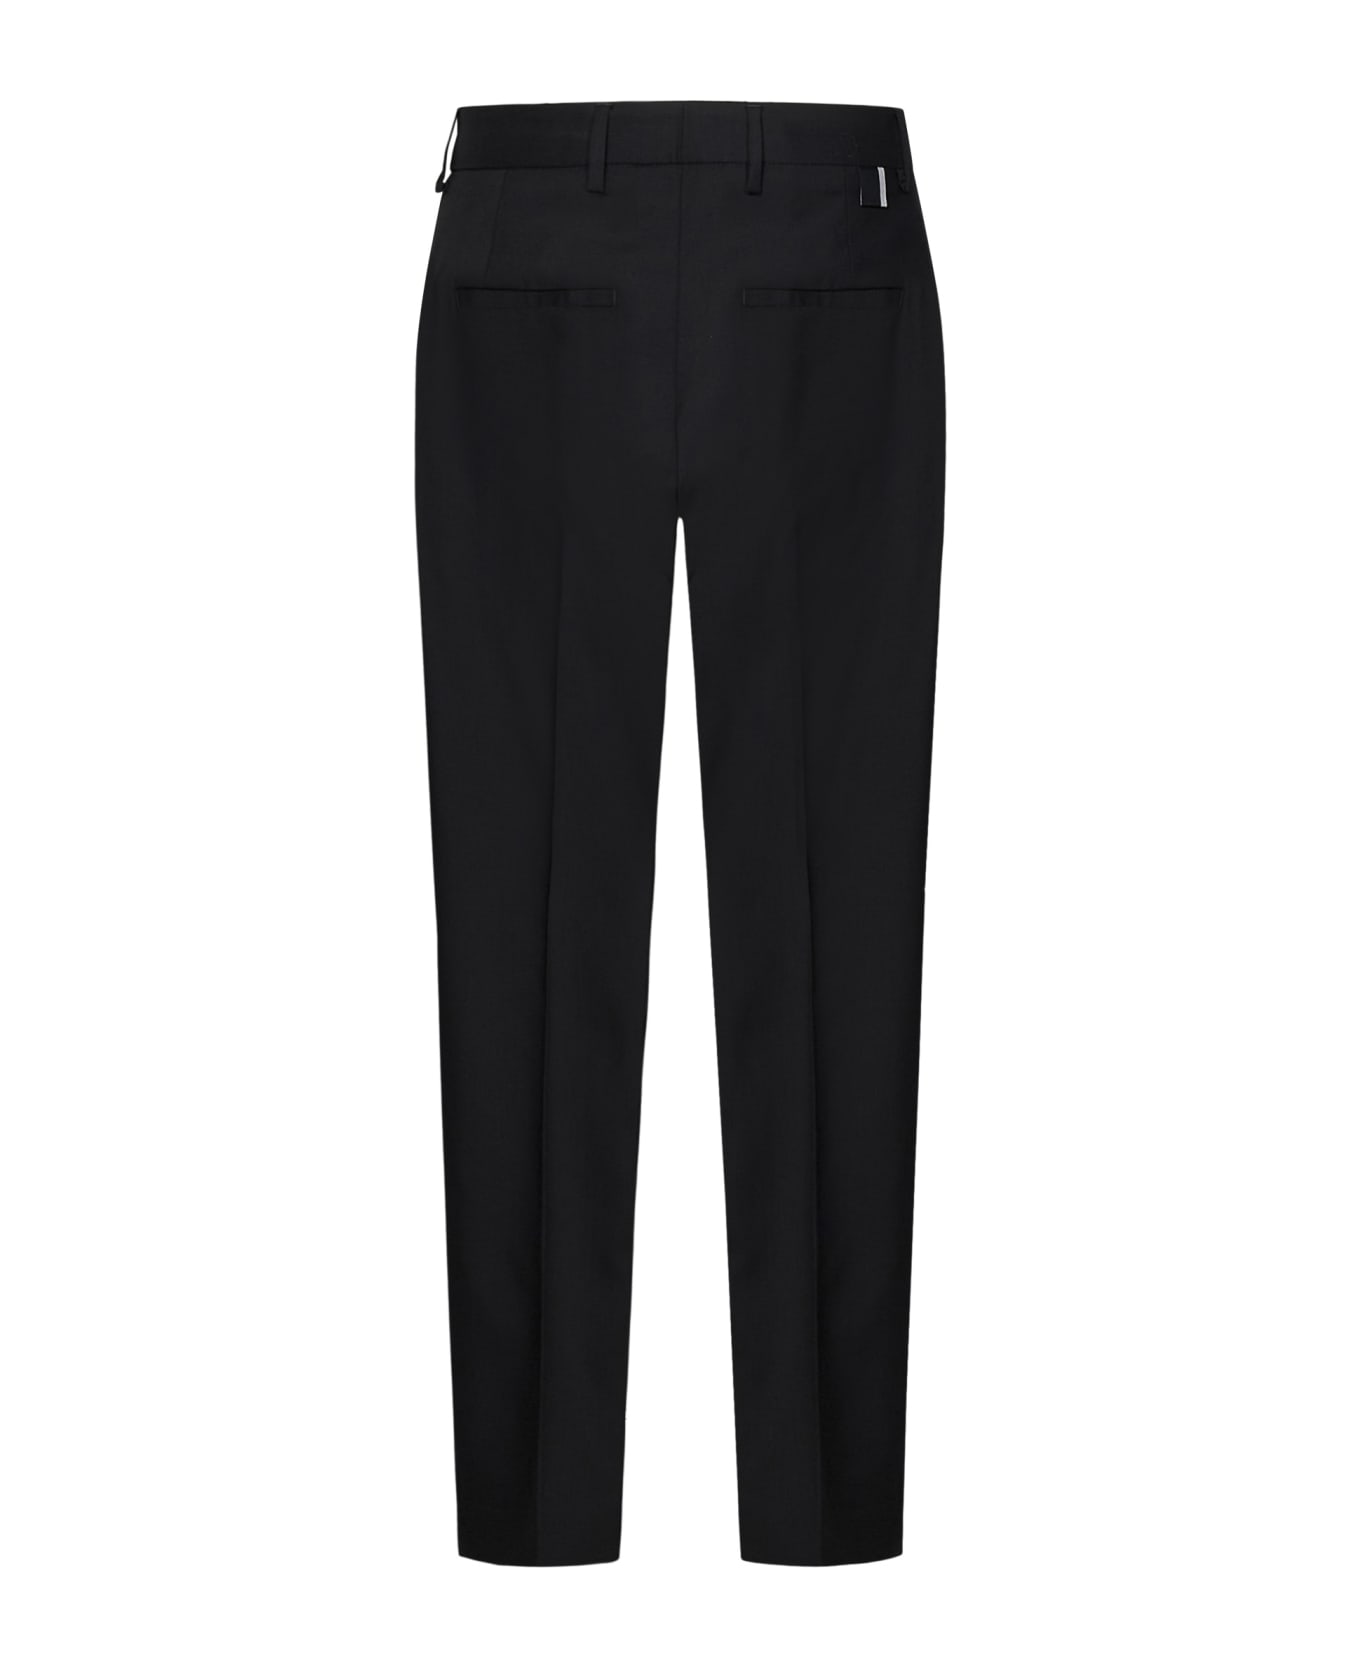 Low Brand Cooper Pocket Trousers - Black